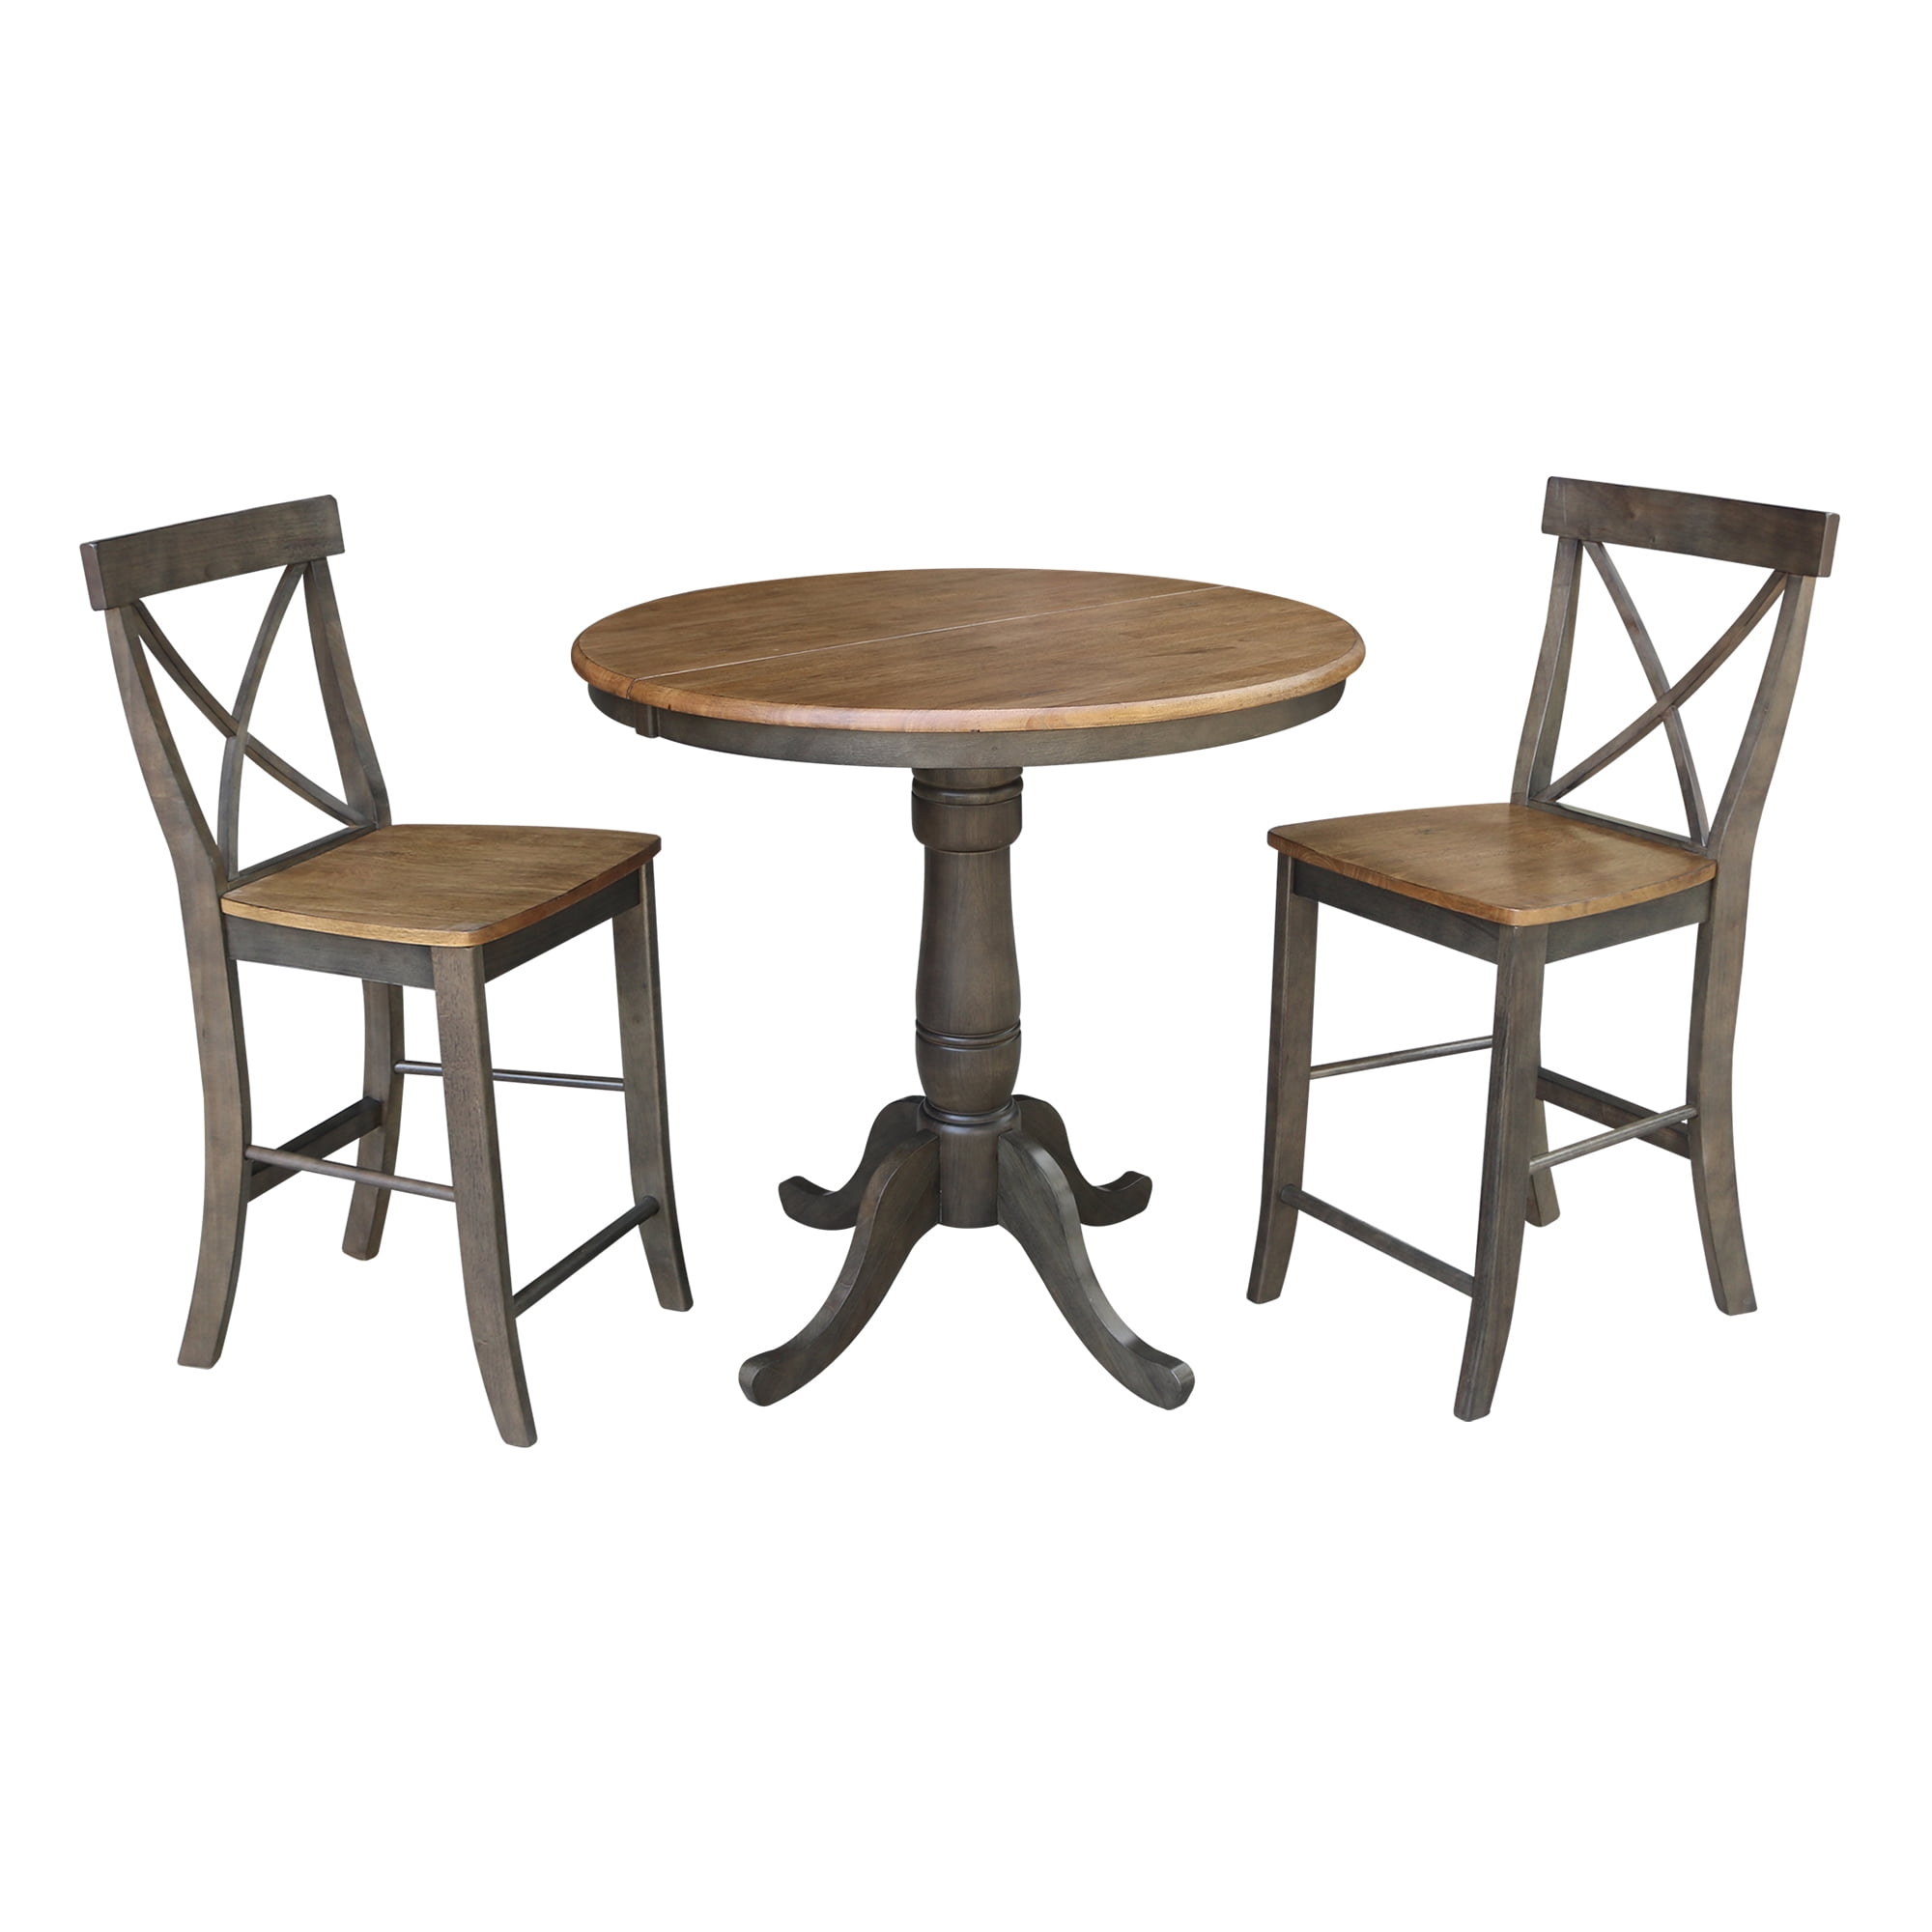 36 Round Extension Dining Table With 2, Round Extendable Dining Table Counter Height